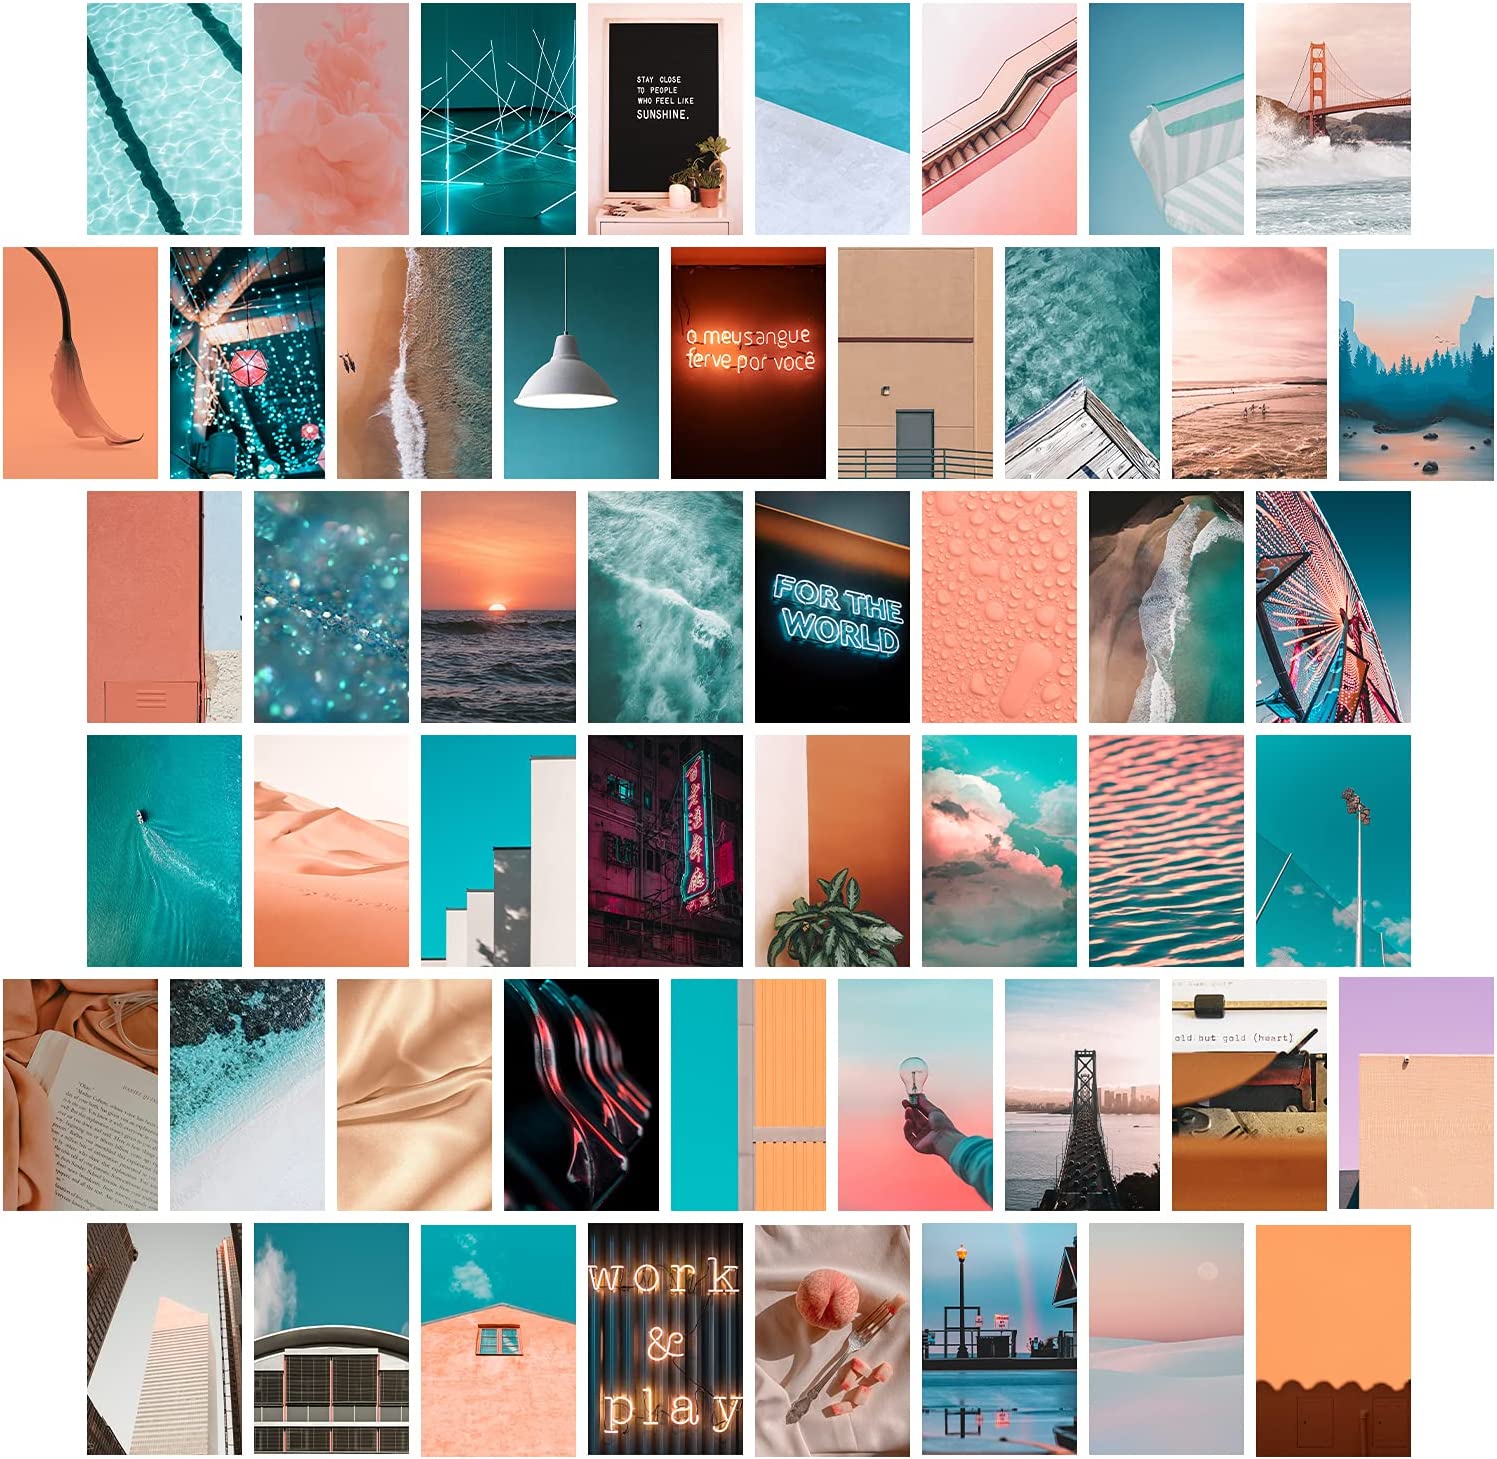 Peach & Teal Wall Collage Kit Aesthetic Picture 50 Pcs 4x6 Inch VSCO Ins Bedroom Preppy Dorm Decor for Teen Girls Peachy Aesthetic Photo Posters Wall Collage Indie Wall Art Prints